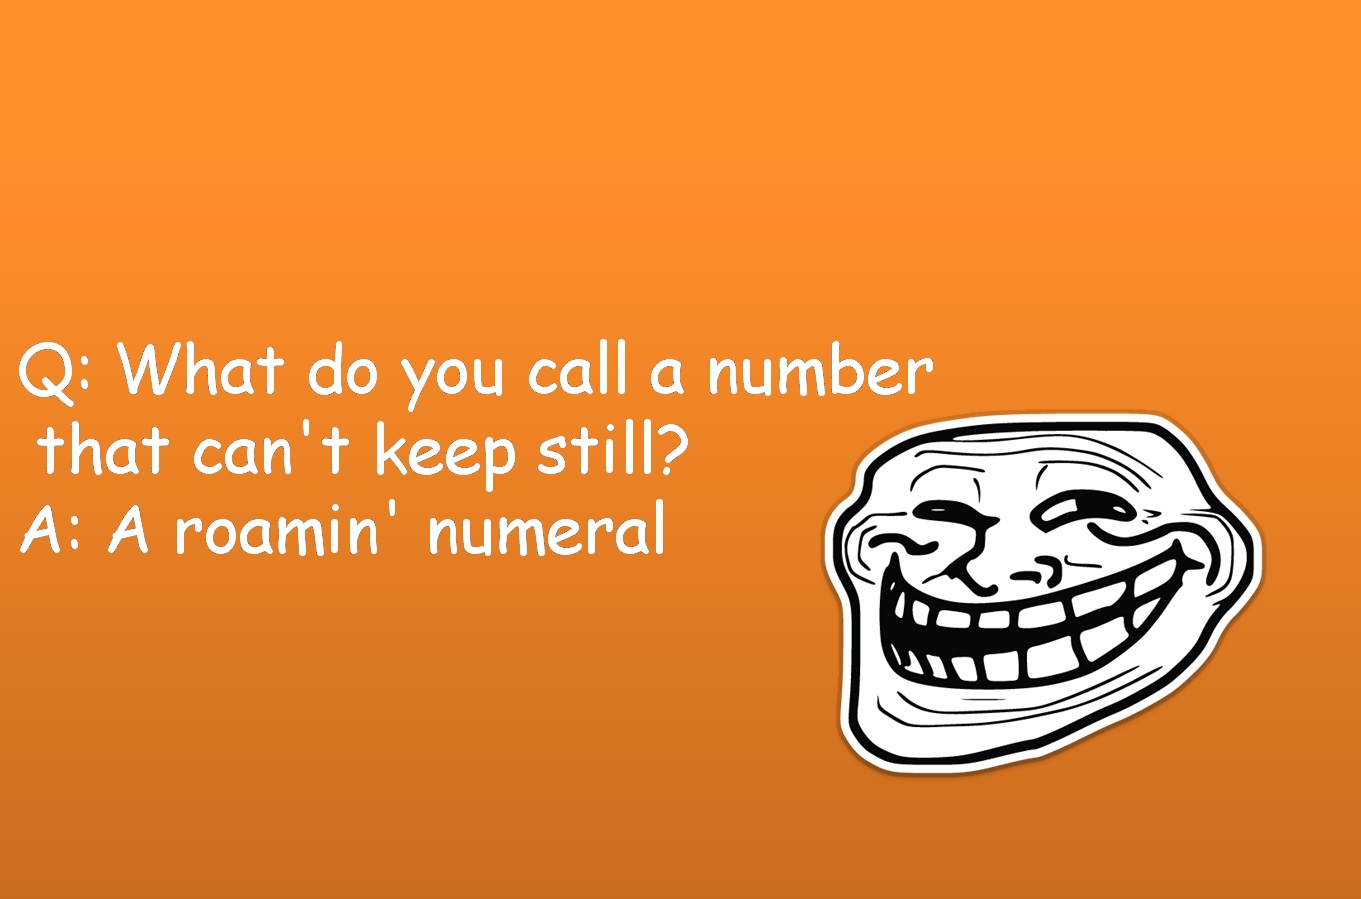 Q: What do you call a number that can't keep stillA: A roamin' numeral